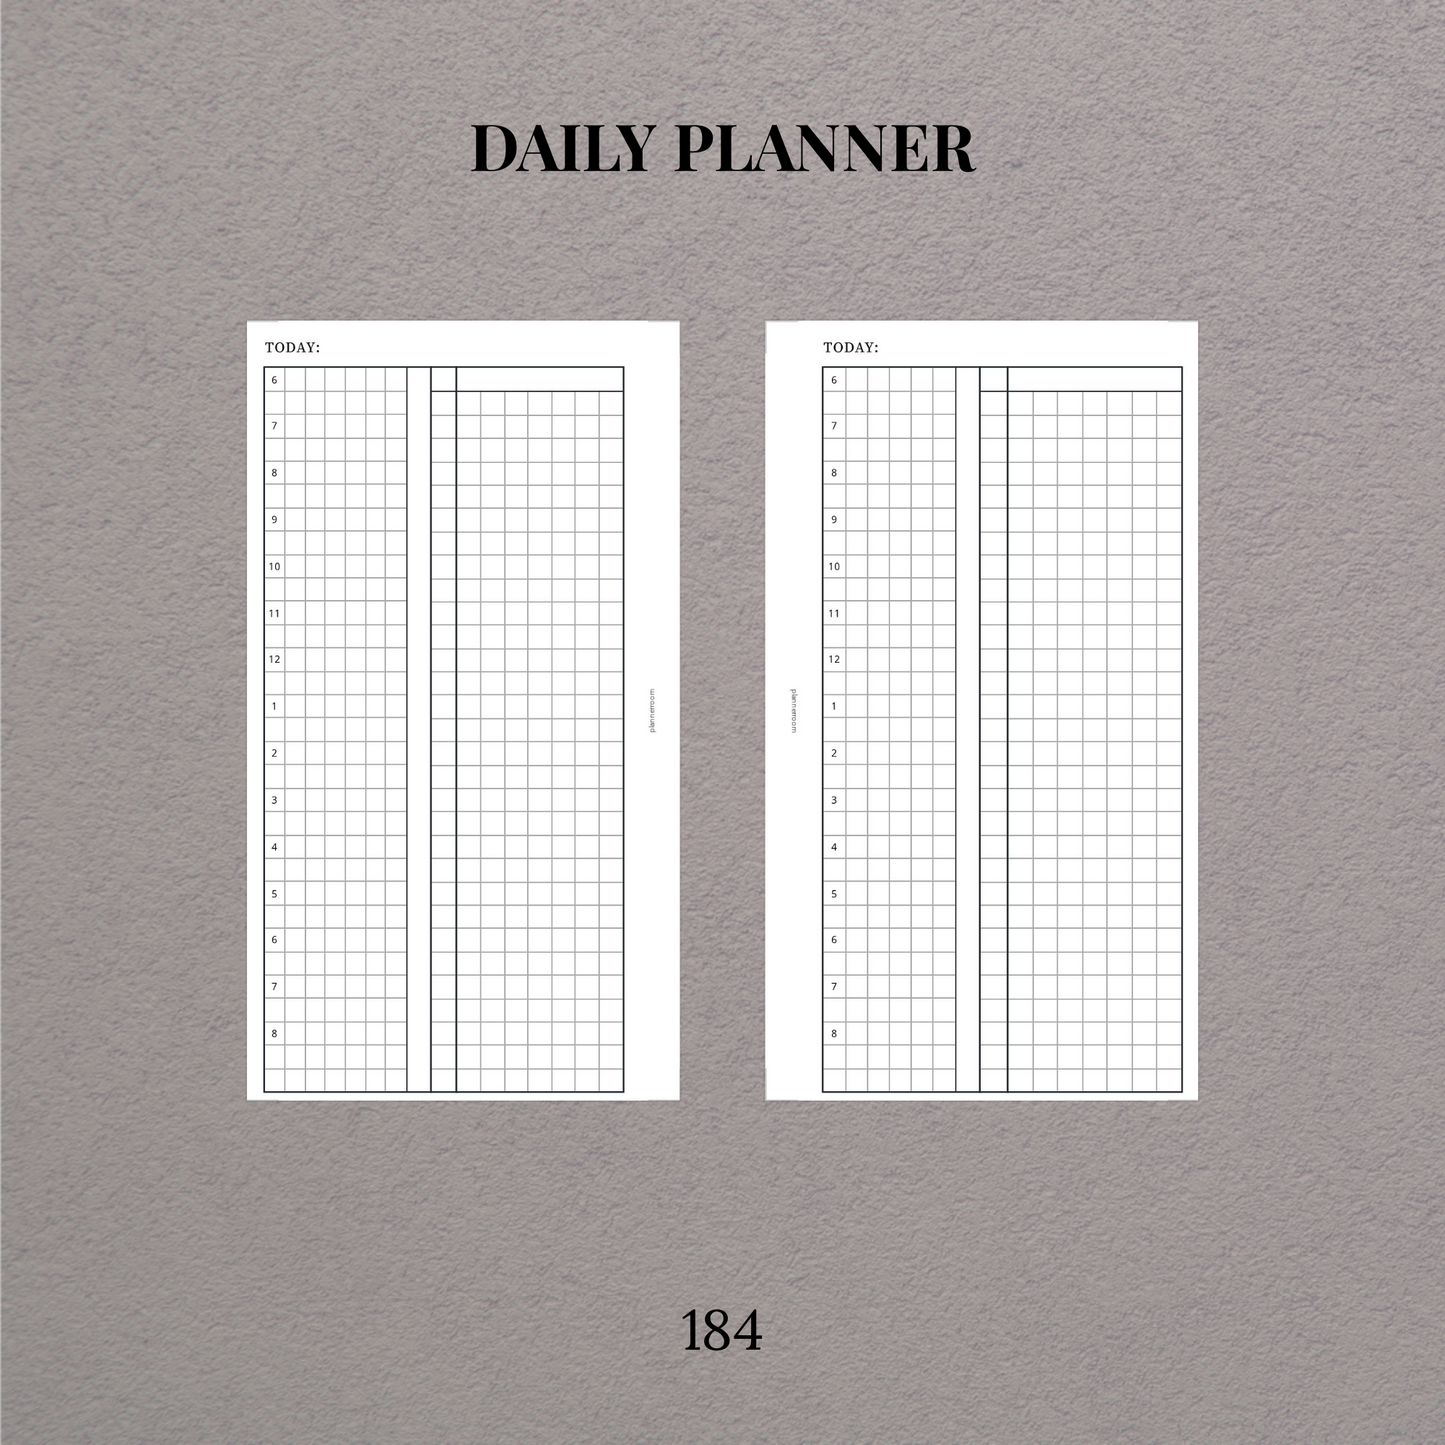 Daily planner - 184